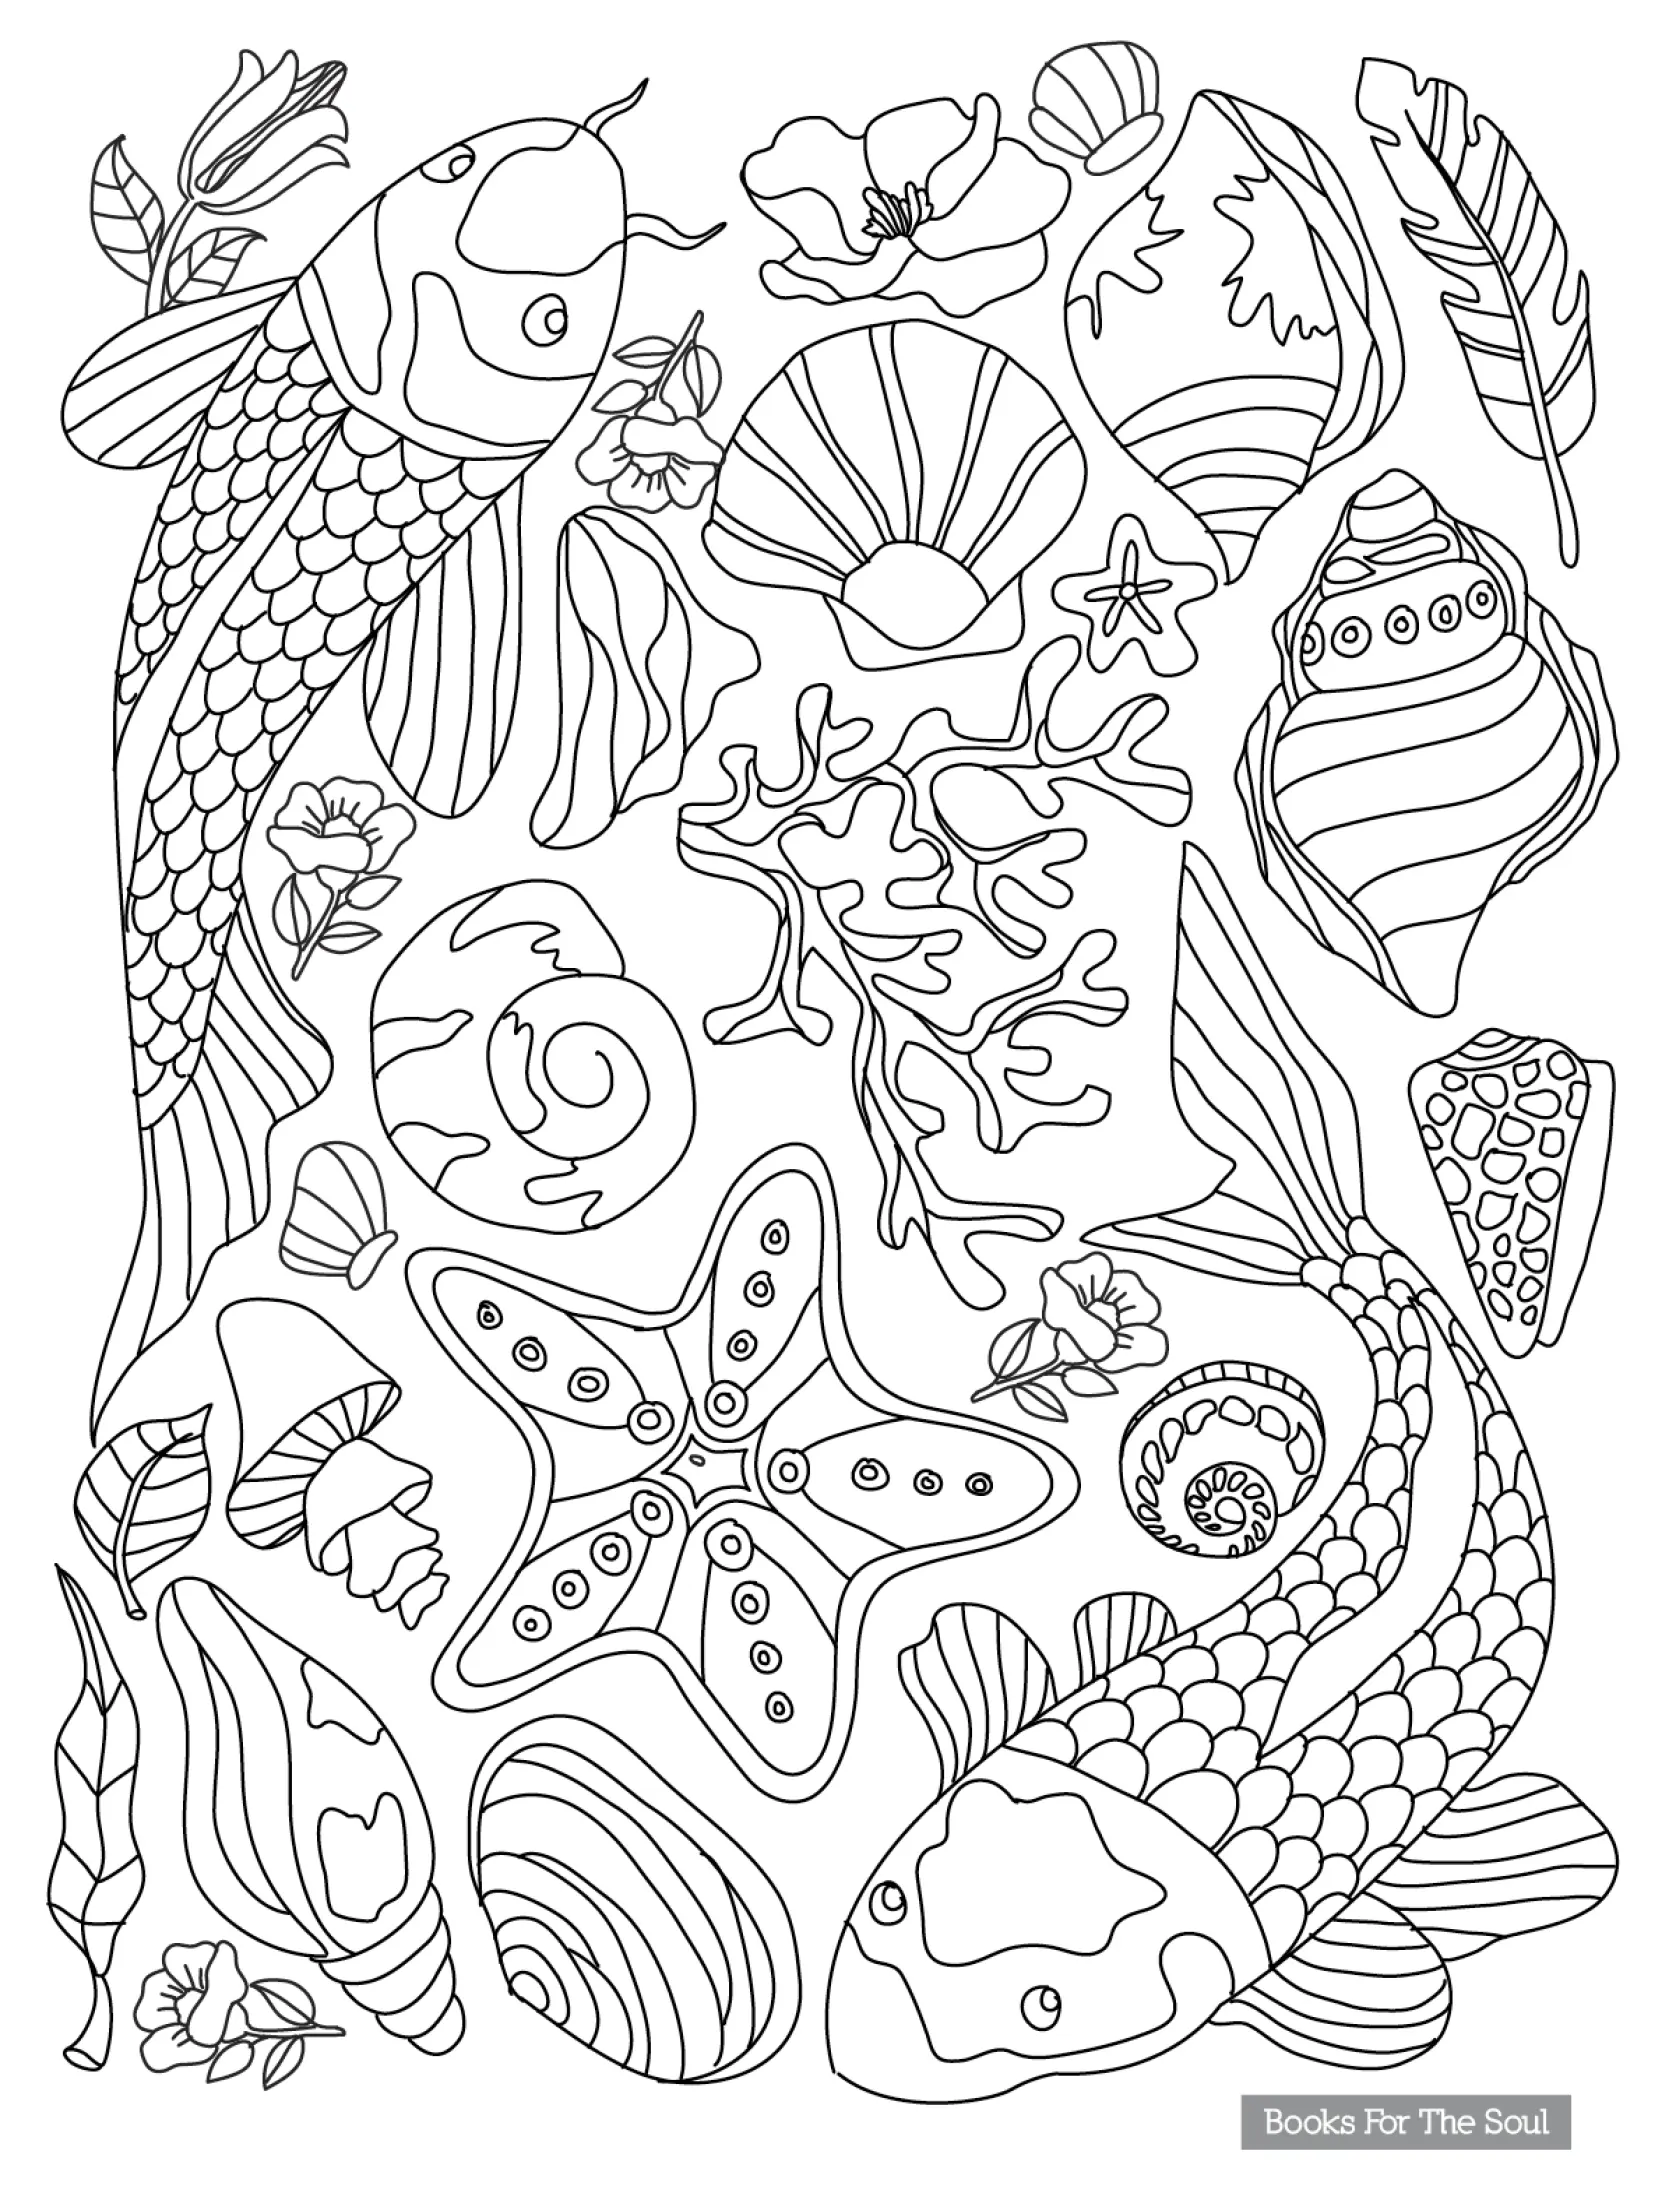 Download Books For The Soul Coloring Book For Adults Flora And Fauna Lazada Ph